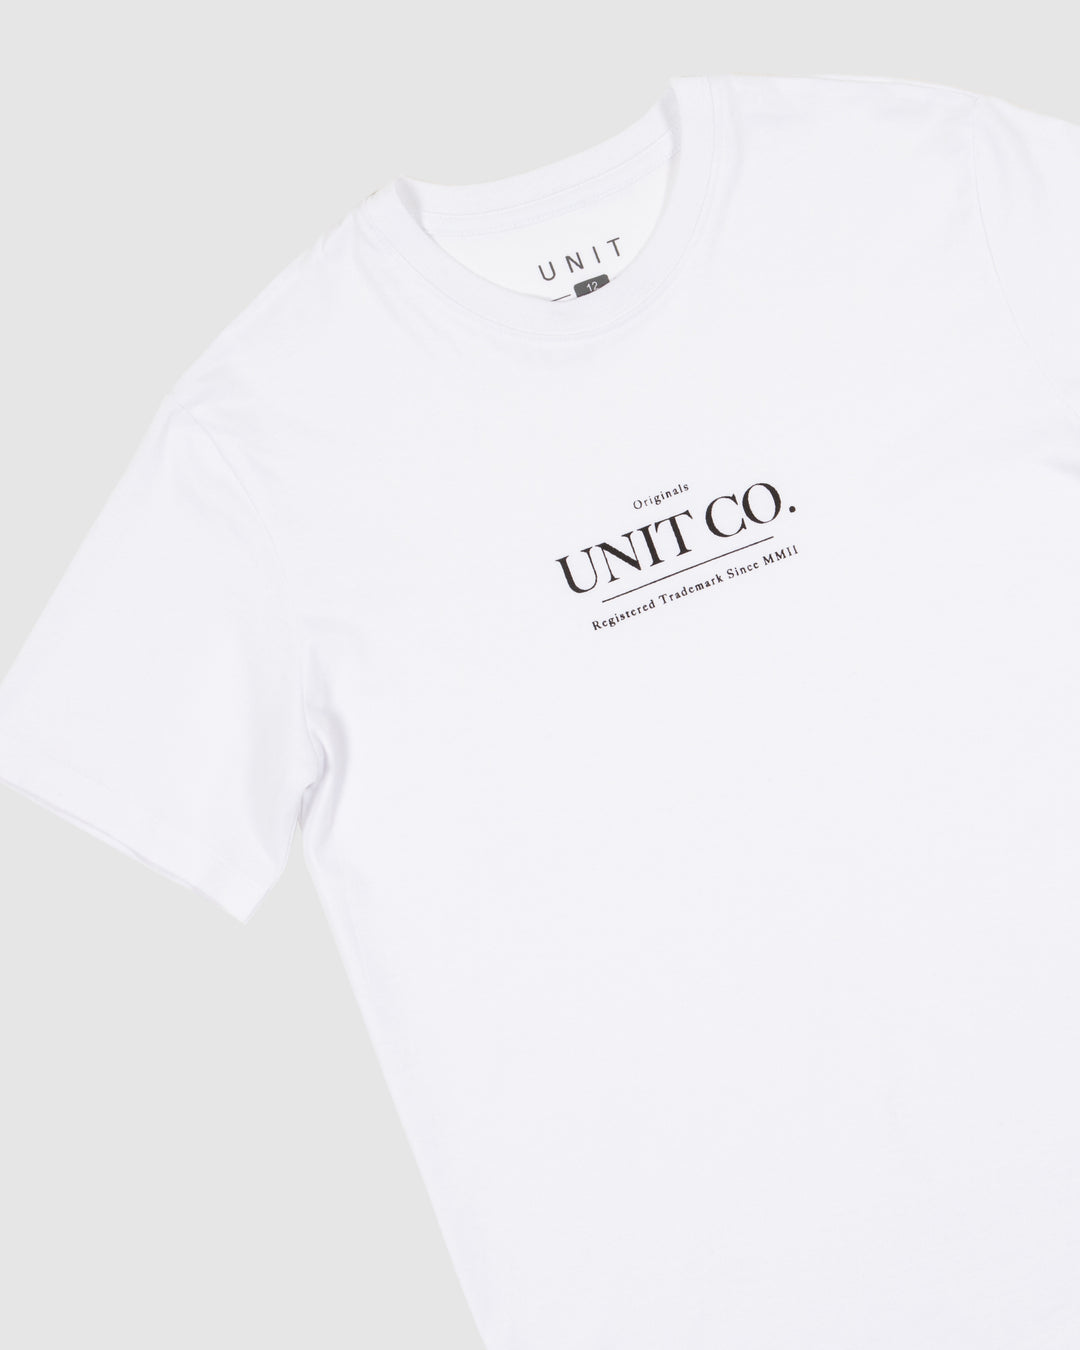 UNIT Roots Youth Tee